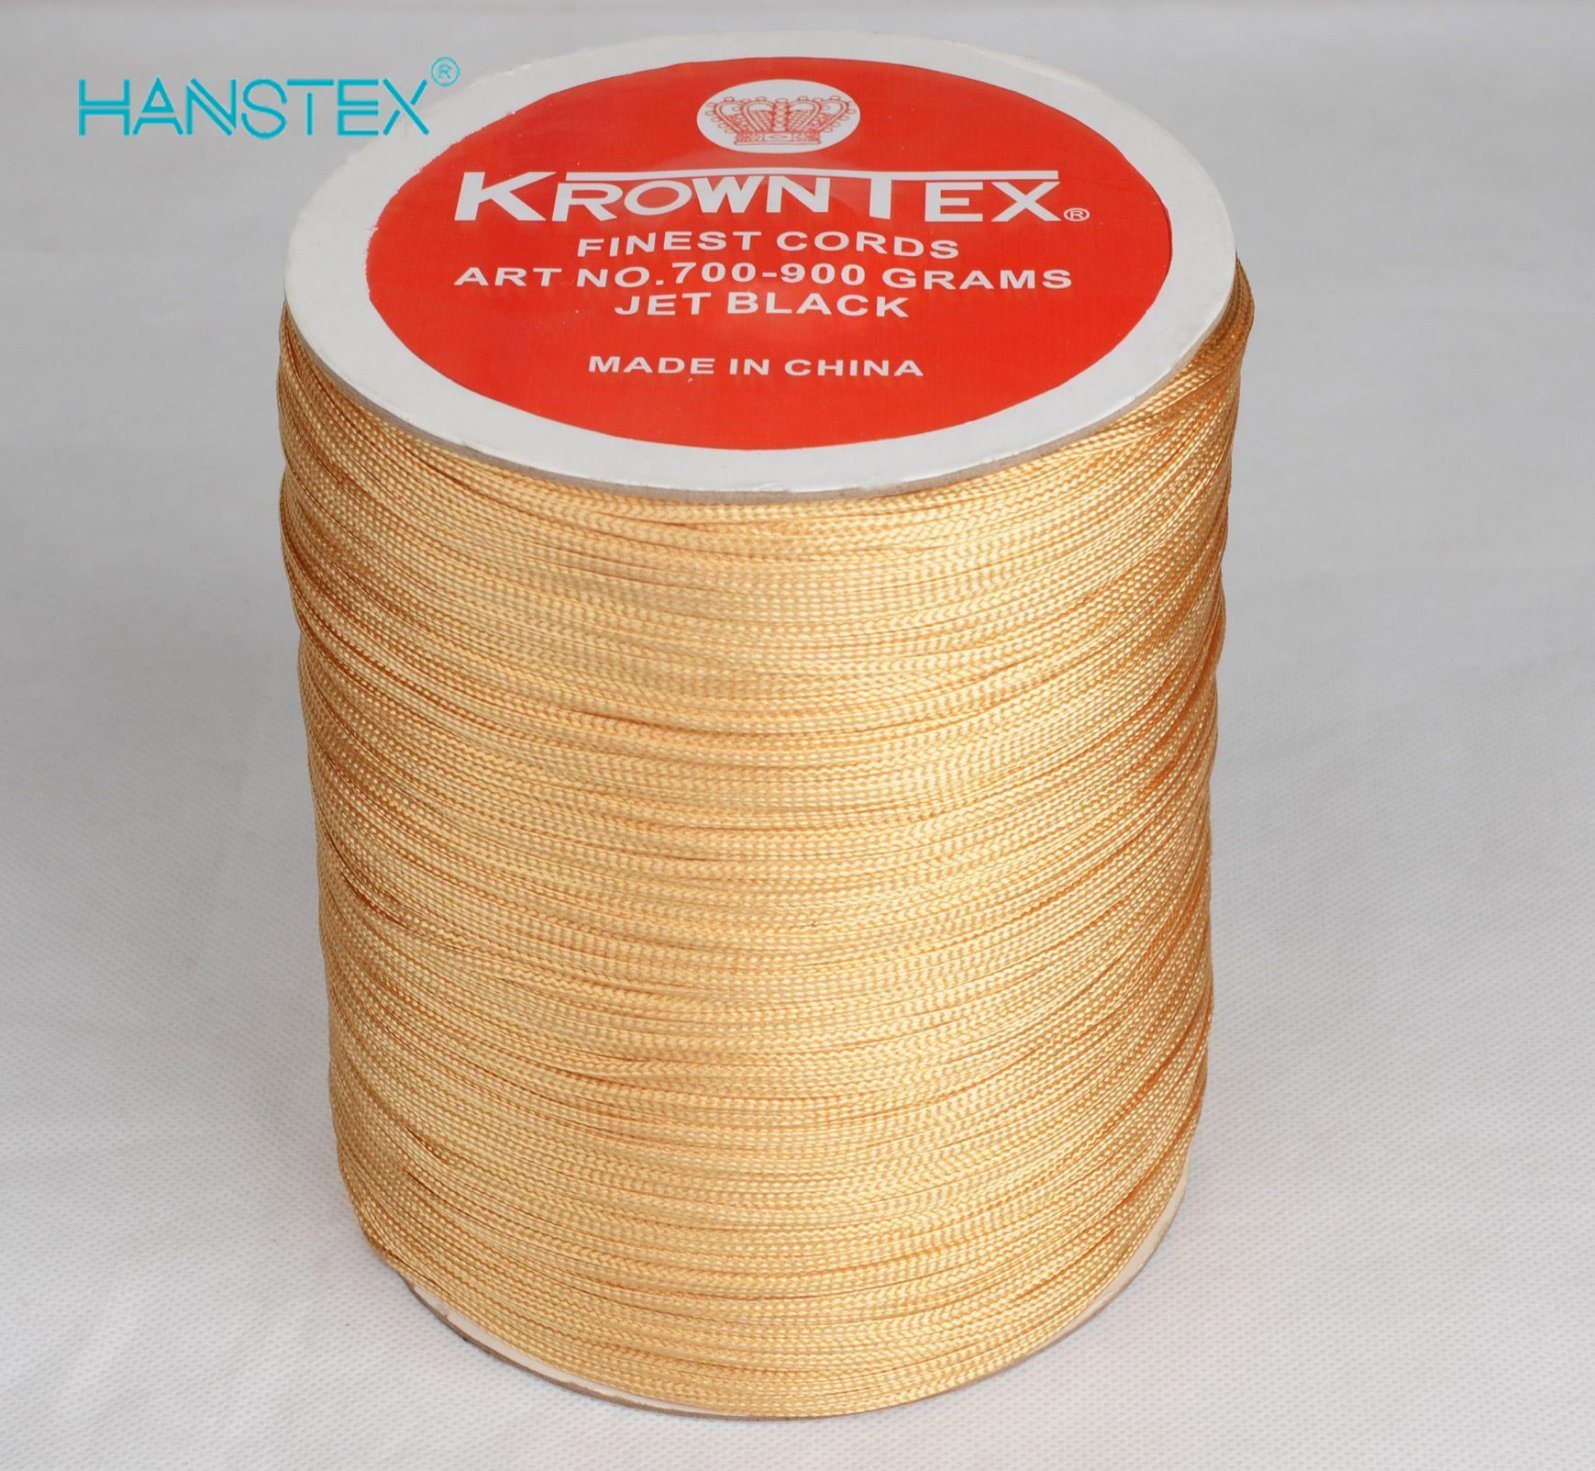 Wholesale Krowntex Finest Cords Flat 100 % Rayon Cord Japan Type Plain 700-900 Grams Pure Color Twin Color for Machine Sewing Garment